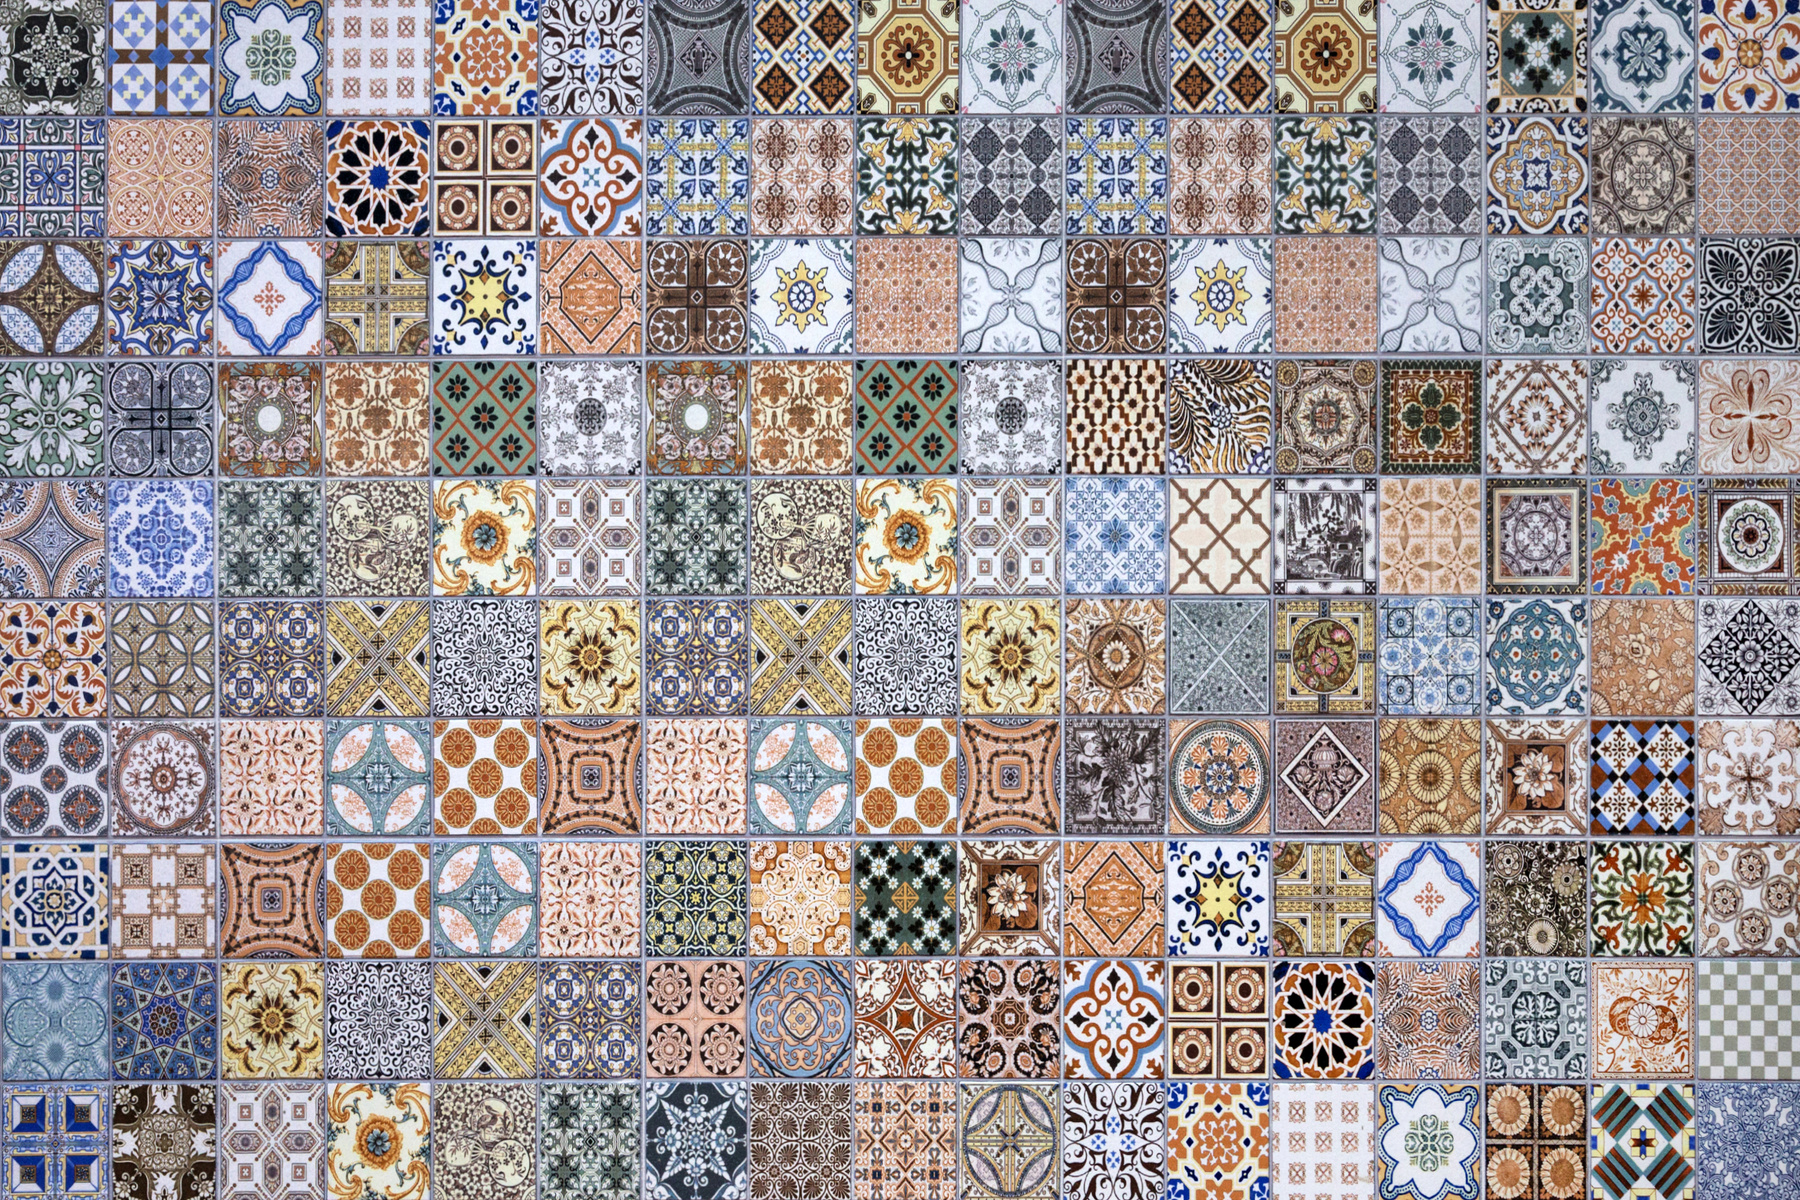 Colorful Patterns of Tile Flooring.